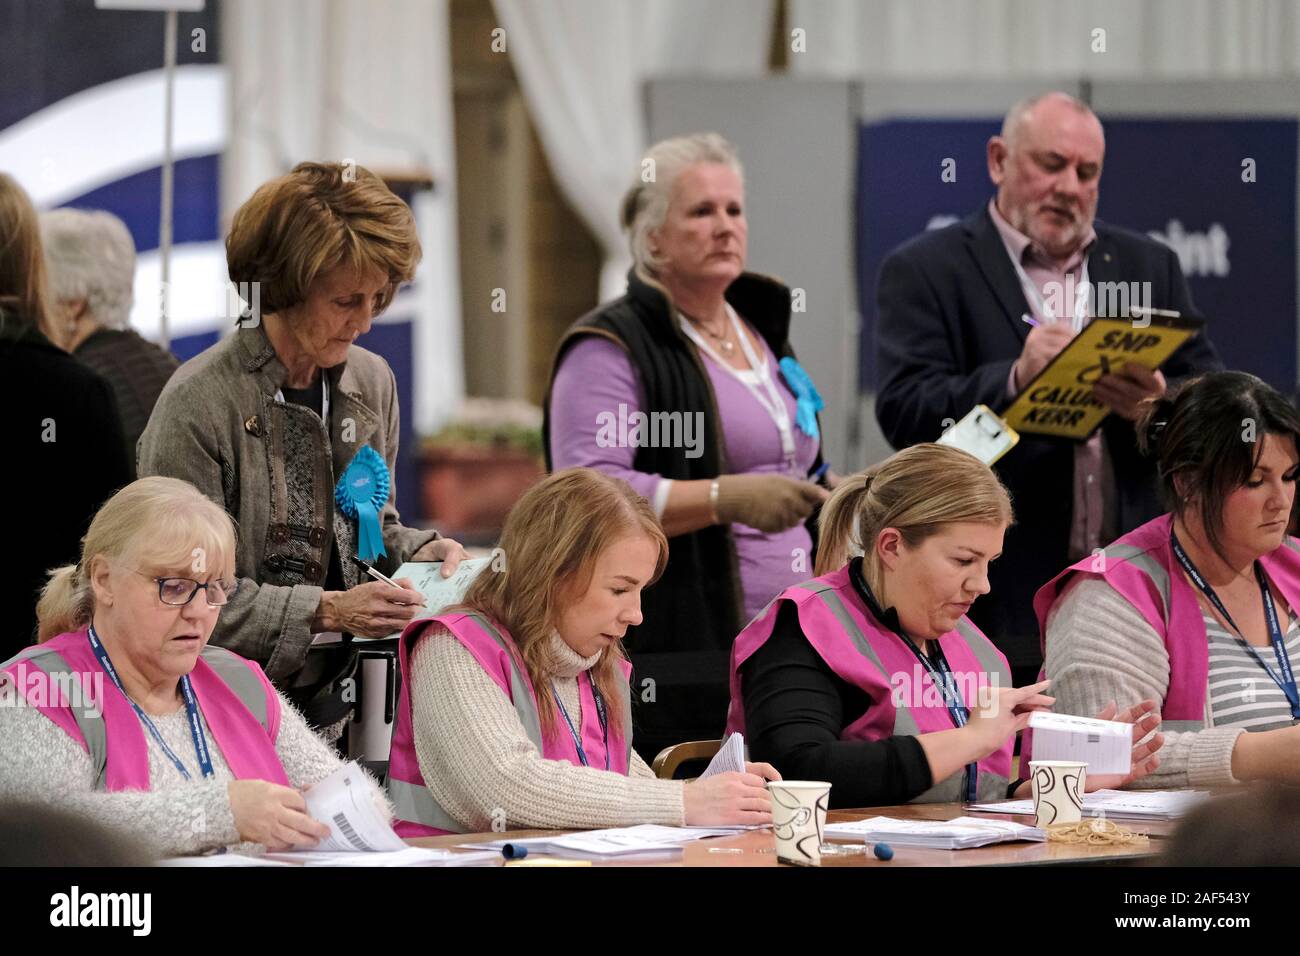 Kelso, Scotland. 12 Dec, 2019. UK Elections: Count, Berwickshire, Roxburgh And Selkirk Constituency - Kelso, UK **** counting staff process ballot papers *** Candidates in the Berwickshire, Roxburgh And Selkirk Constituency Ian Davidson, Scottish Labour Party Calum Kerr, Scottish National Party (SNP) John Lamont, Scottish Conservative And Unionist Party Jenny Marr, Scottish Liberal Democrats . *** Total Electorate for the constituency - 74,518 Number of polling places - 96 Number of Ballot Boxes - 127 from polling stations plus up to 22 postal vote boxes. Maximum 149 boxes. Credit: Rob Gray/Al Stock Photo